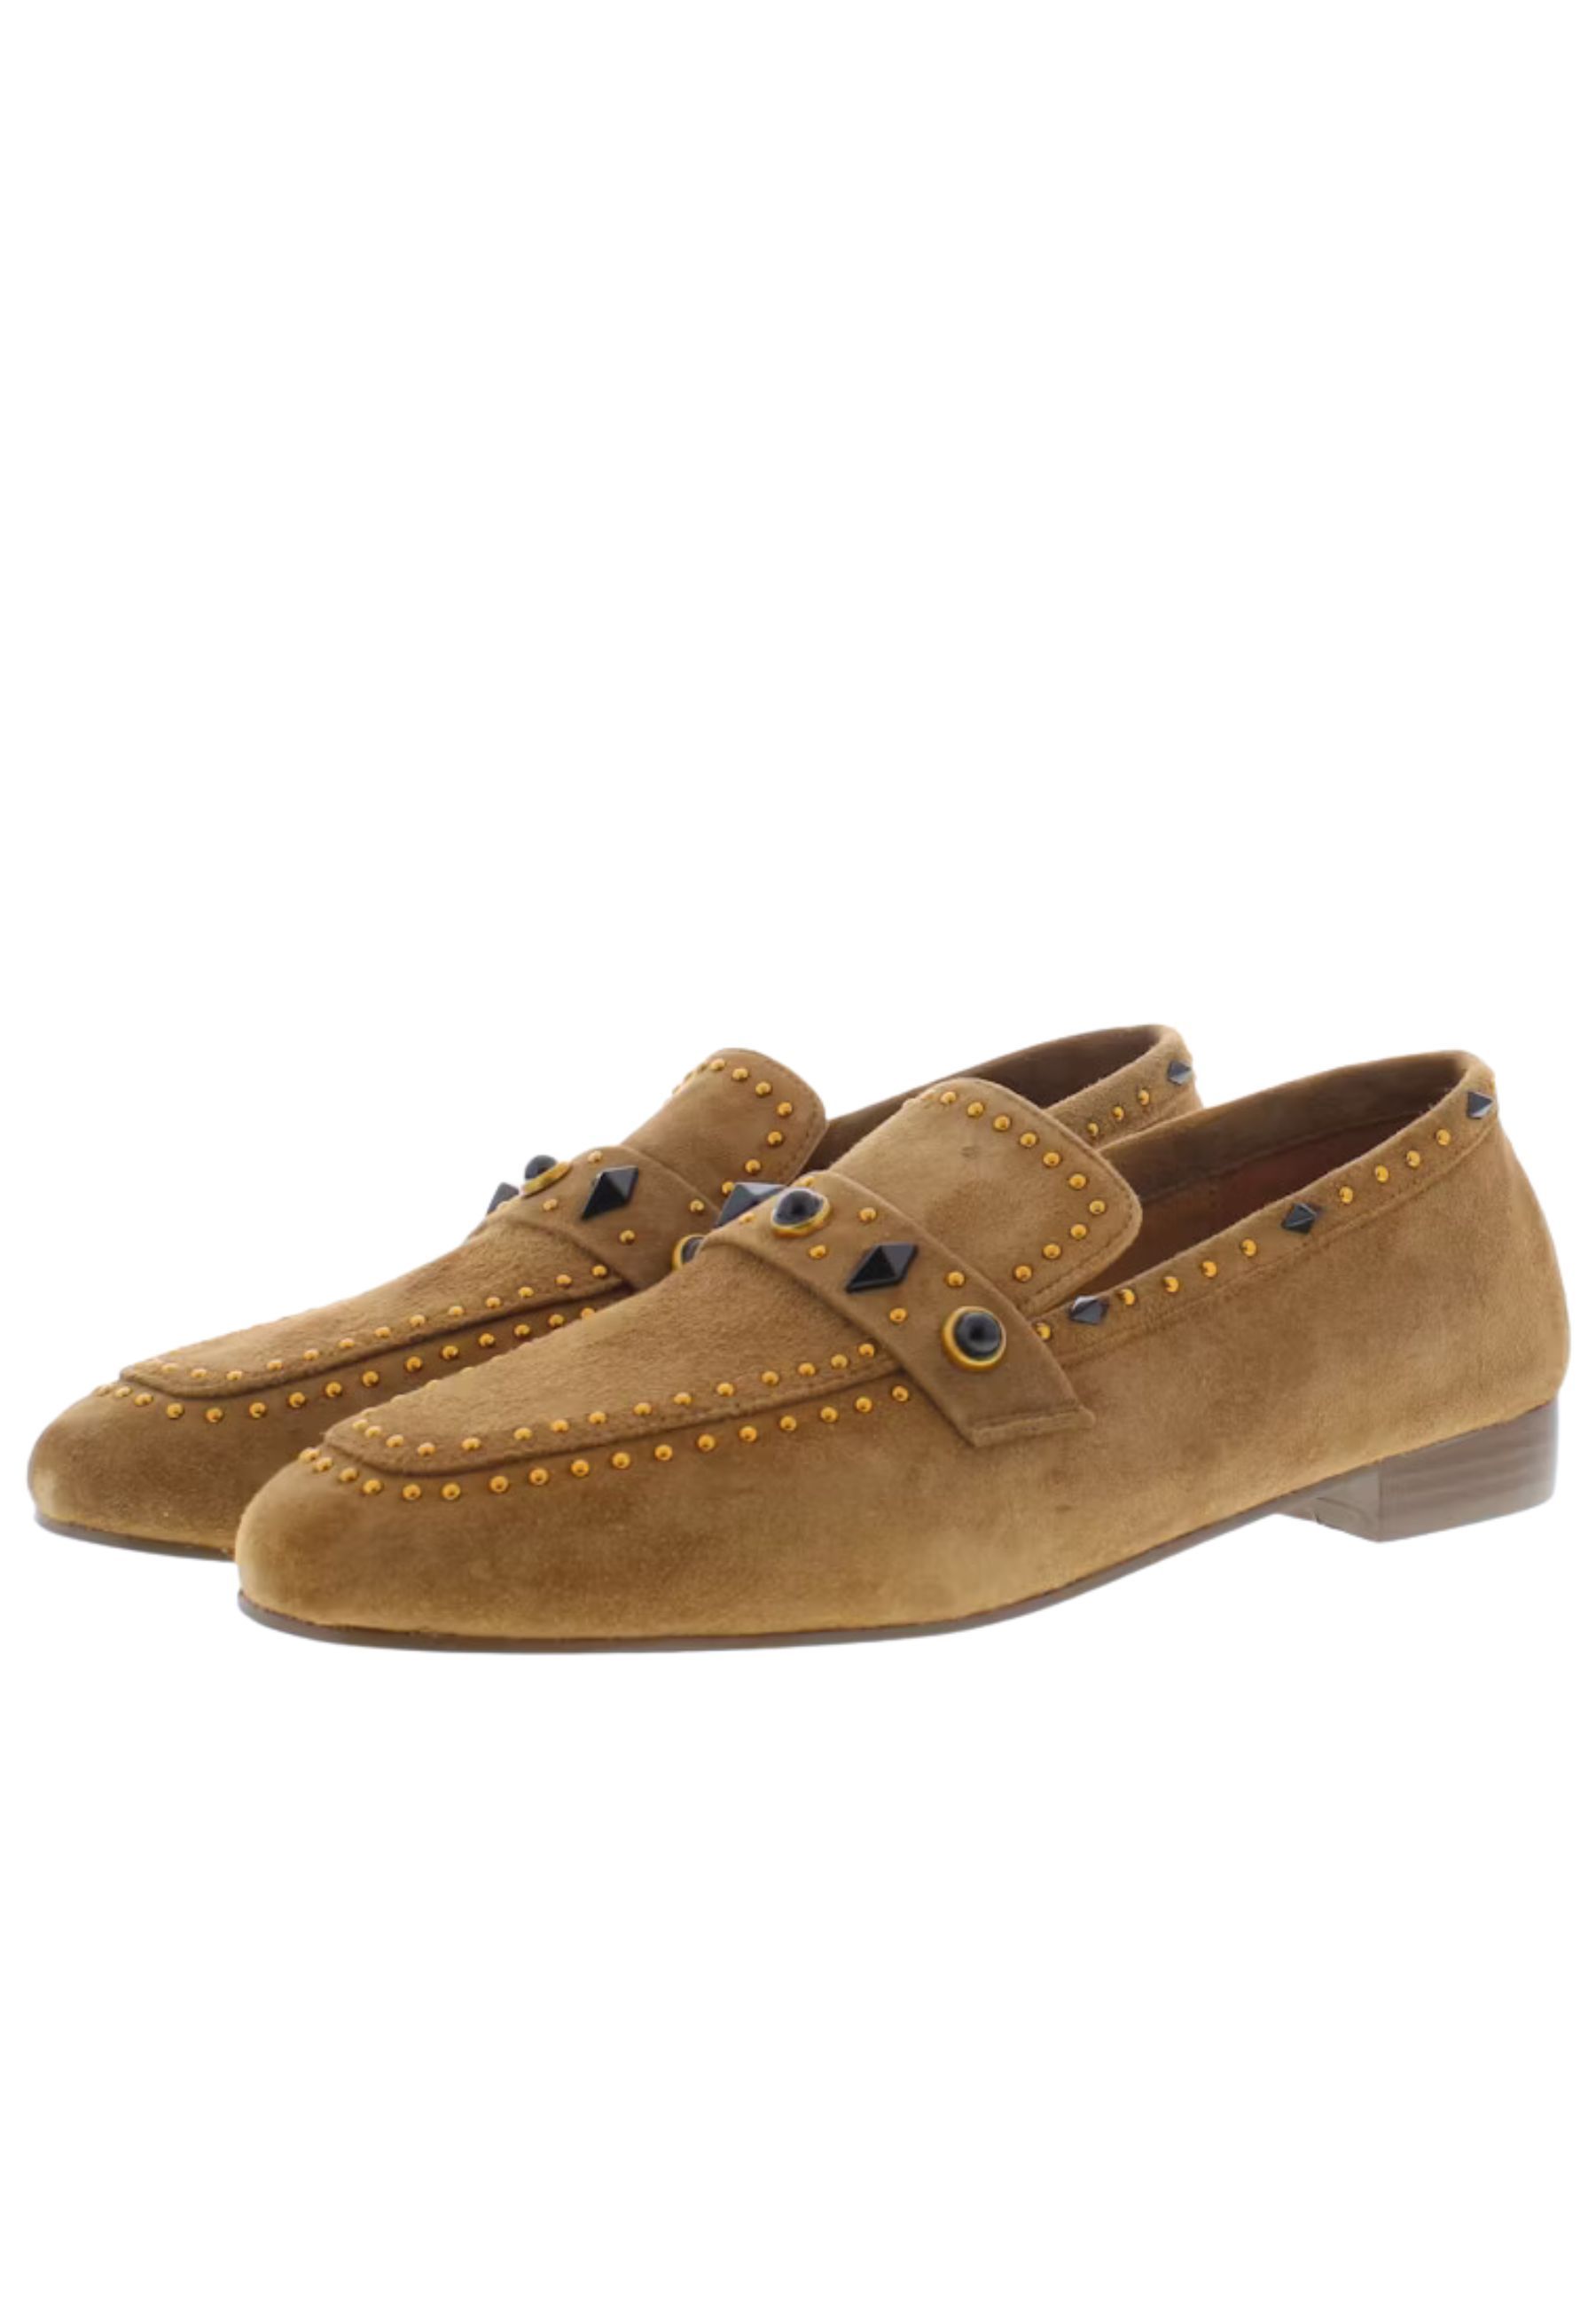 Tl-suzanna loafers camel